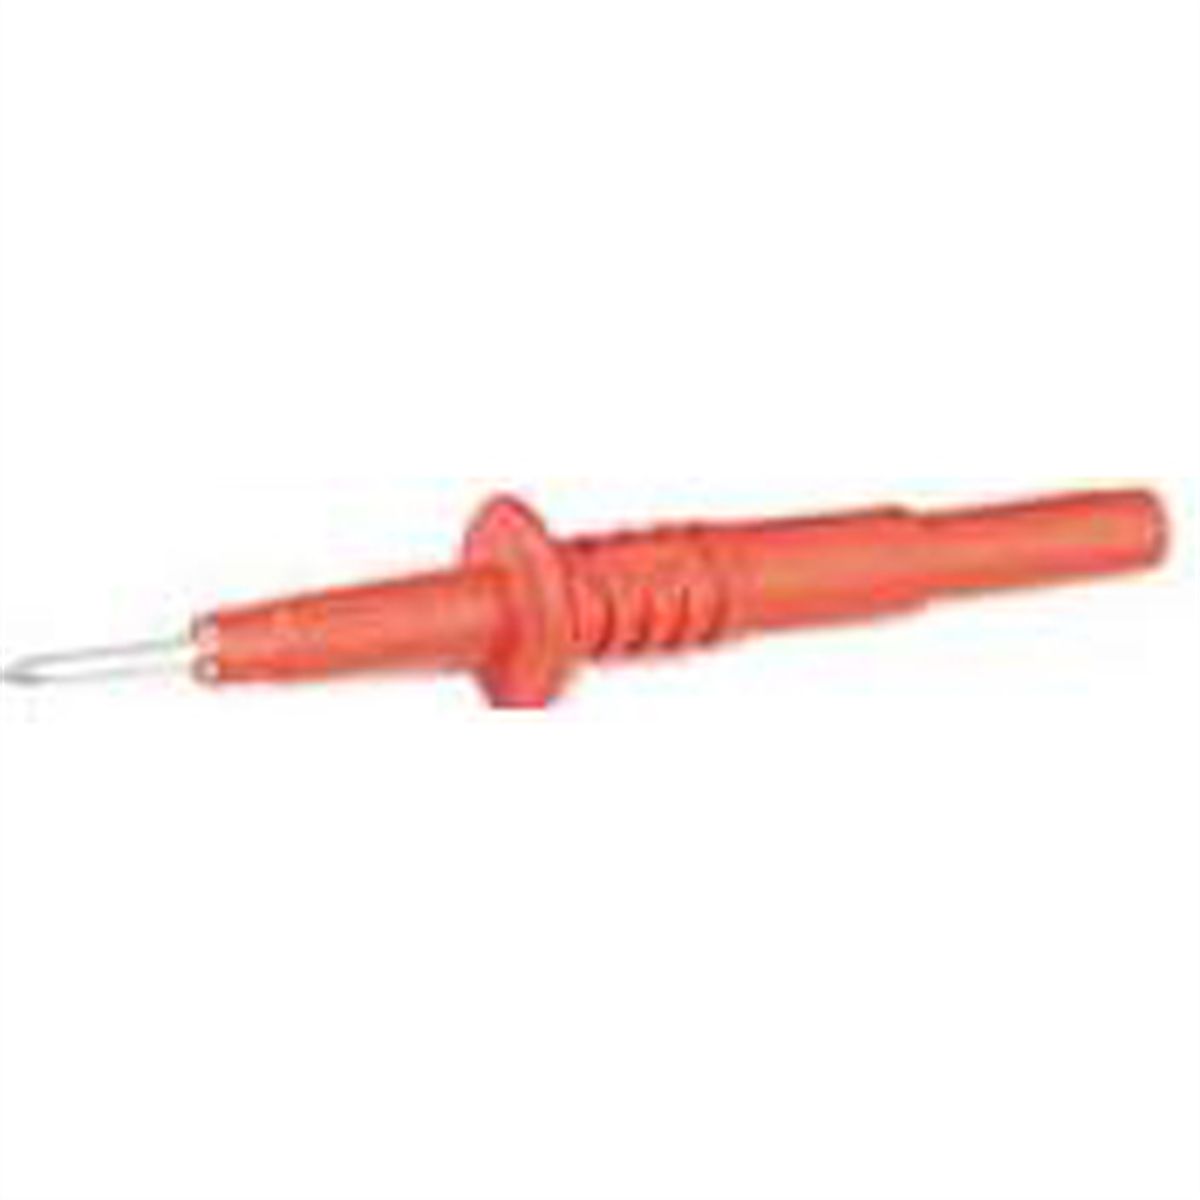 Insulated Plug On Test Probe for Multimeter